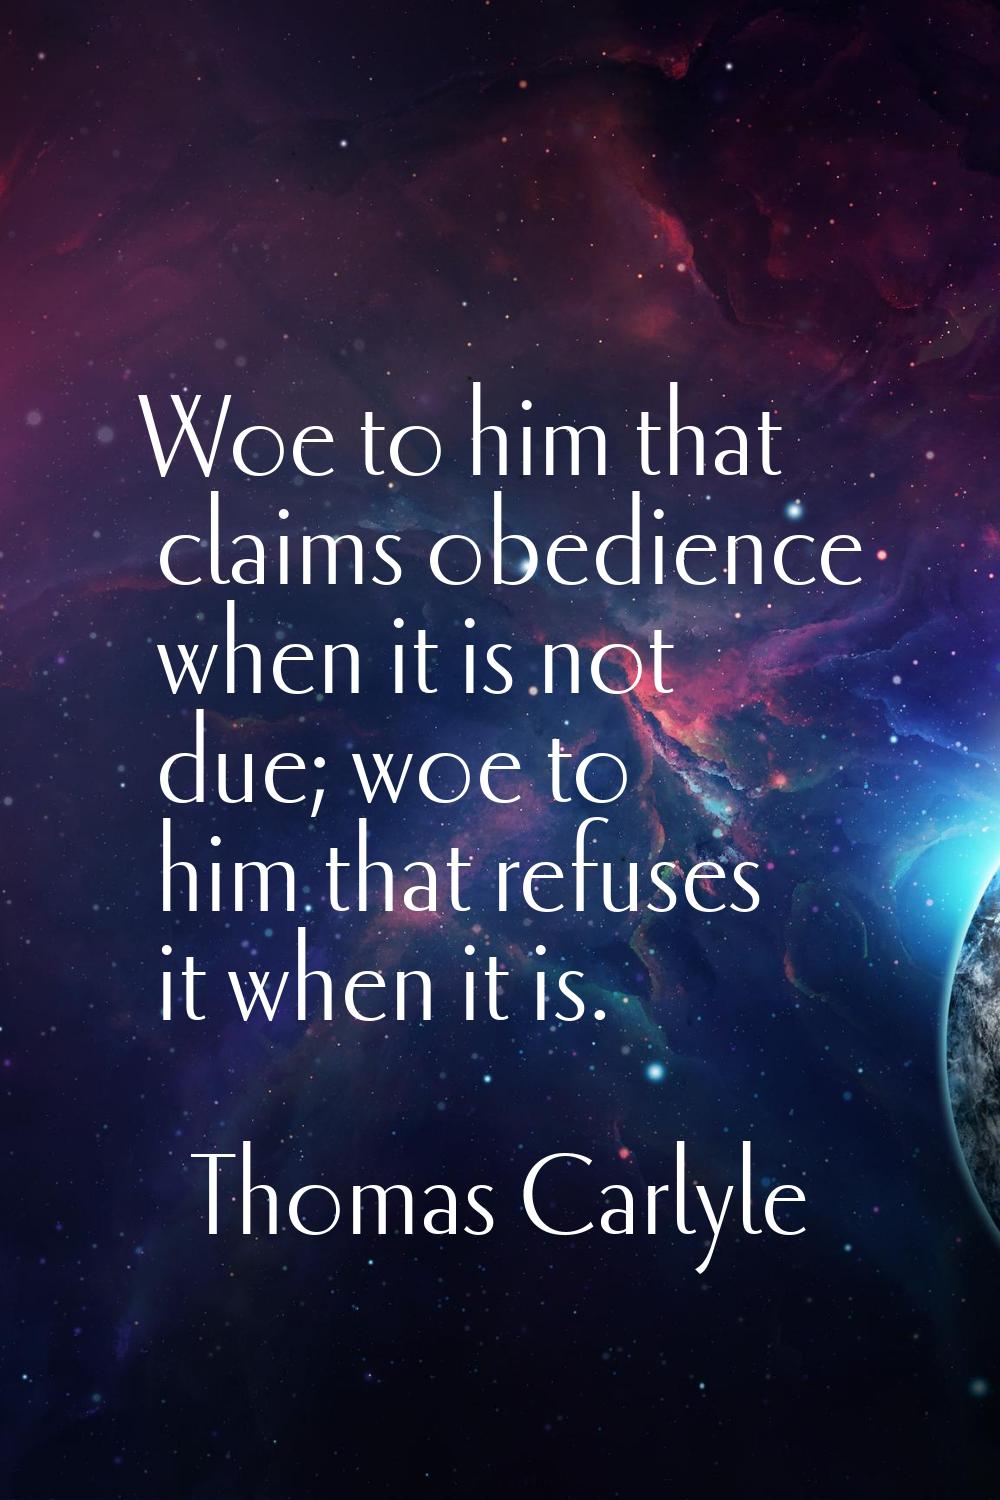 Woe to him that claims obedience when it is not due; woe to him that refuses it when it is.